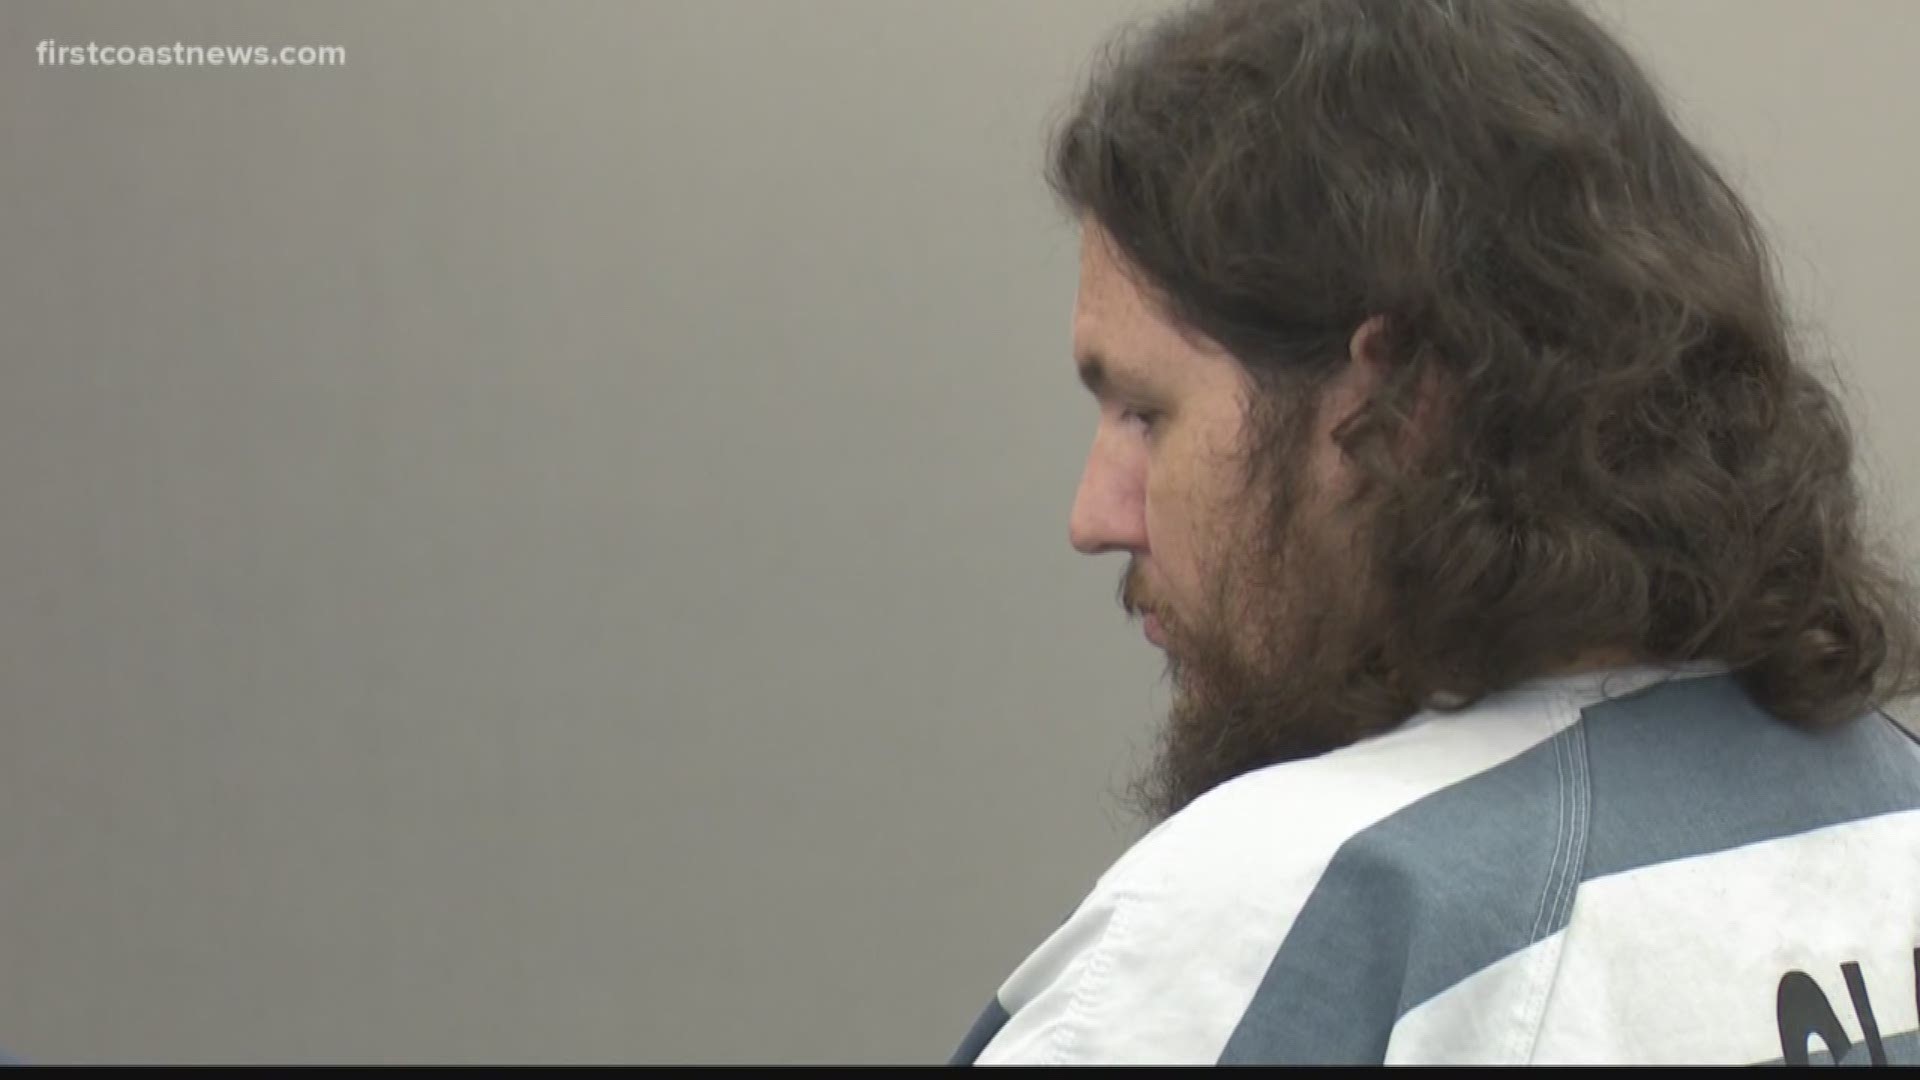 Donald Davidson is accused of raping a 10-year-old girl and murdering her mother.